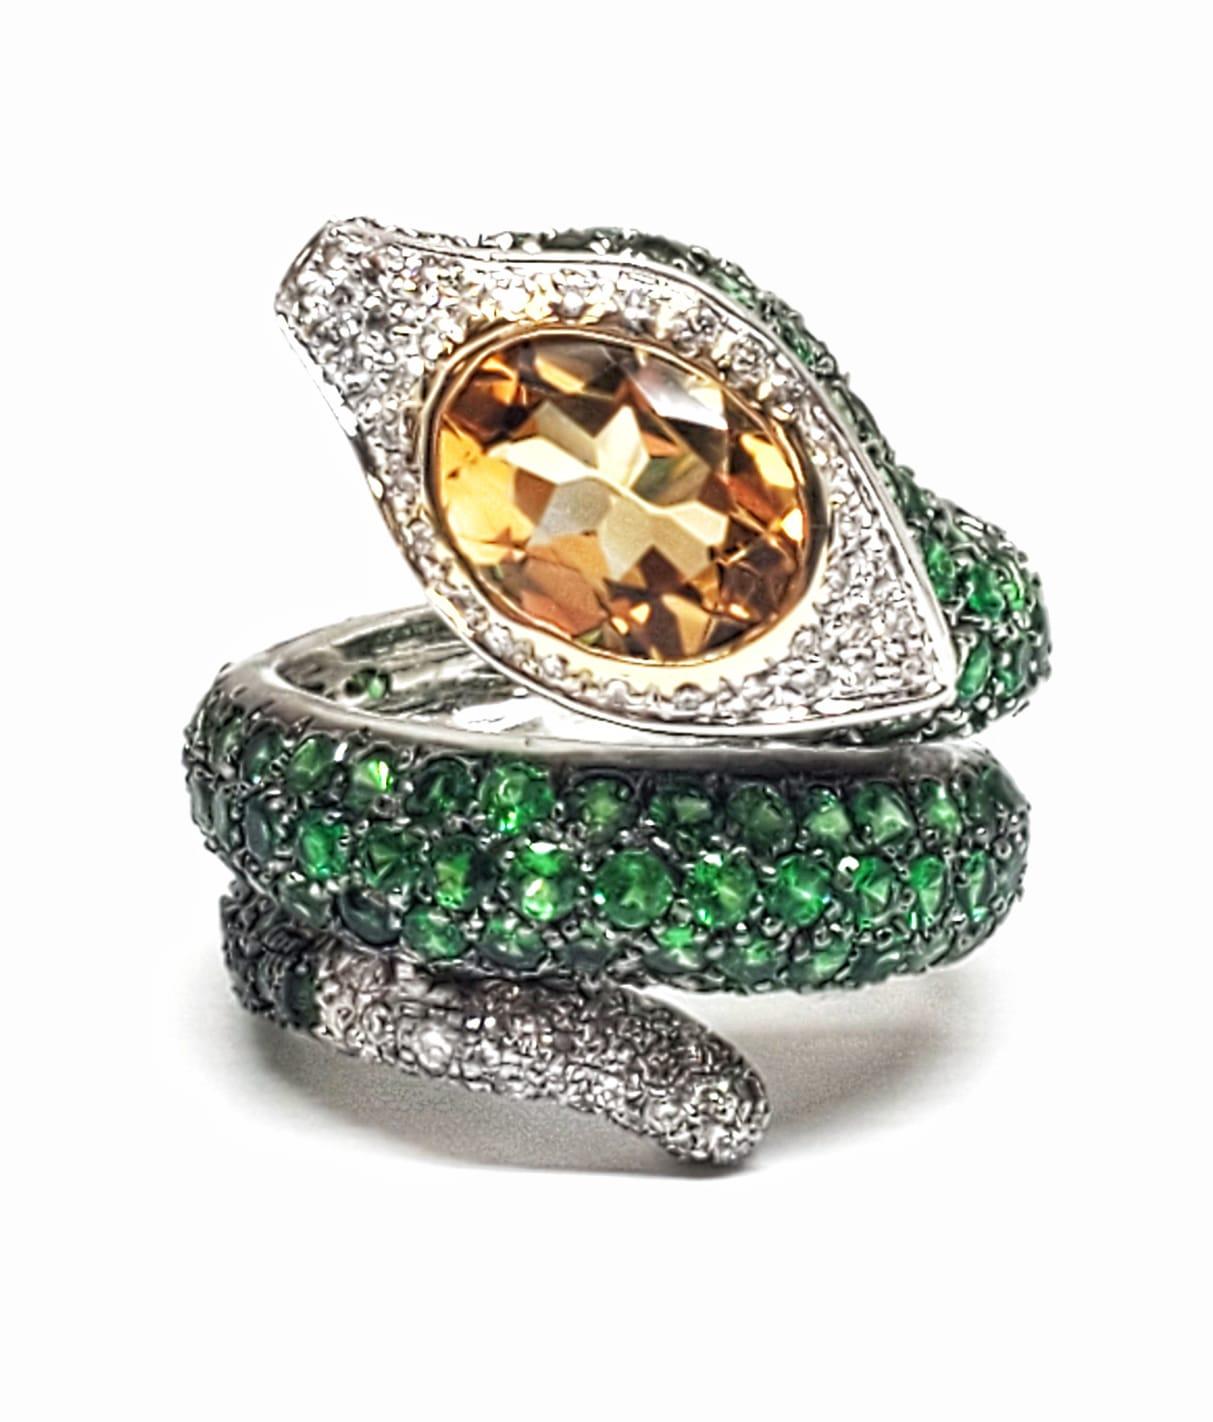 Andreoli Diamond Citrine Tsavorite 18 Karat White Gold Serpent Ring

This ring features:
- 0.49 Carat Diamond
- 1.95 Carat Citrine
- 5.76 Carat Tsavorite
- 19.90 Gram 18K White Gold
- Made In Italy